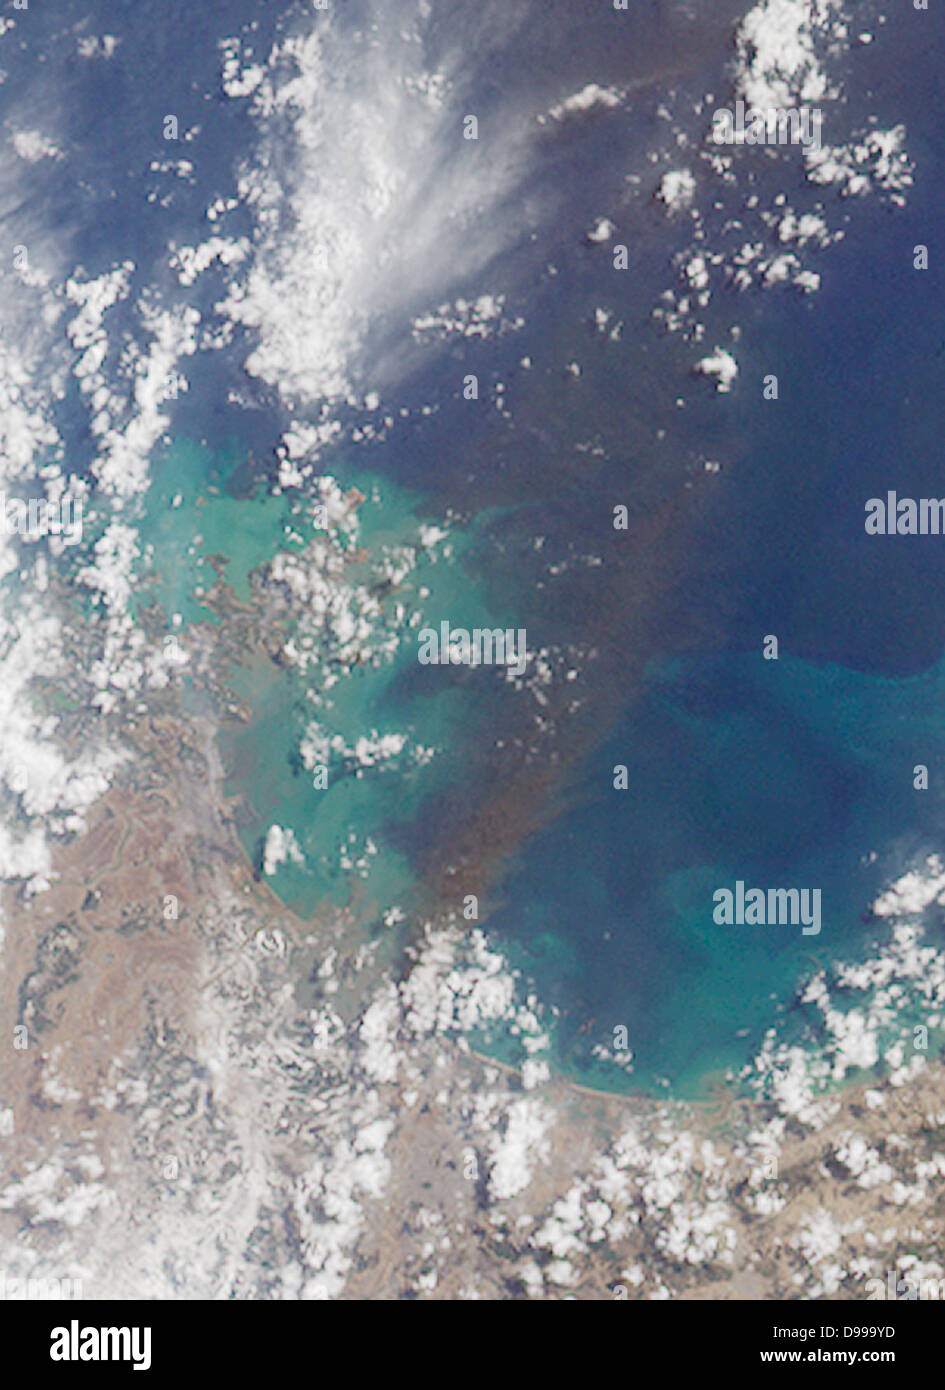 In the aftermath of the massive earthquake that struck northeastern Japan at 2:46 p.m. local time on March 11, 2011, and its subsequent tsunami. March 12, 2011. Satellite image. Stock Photo